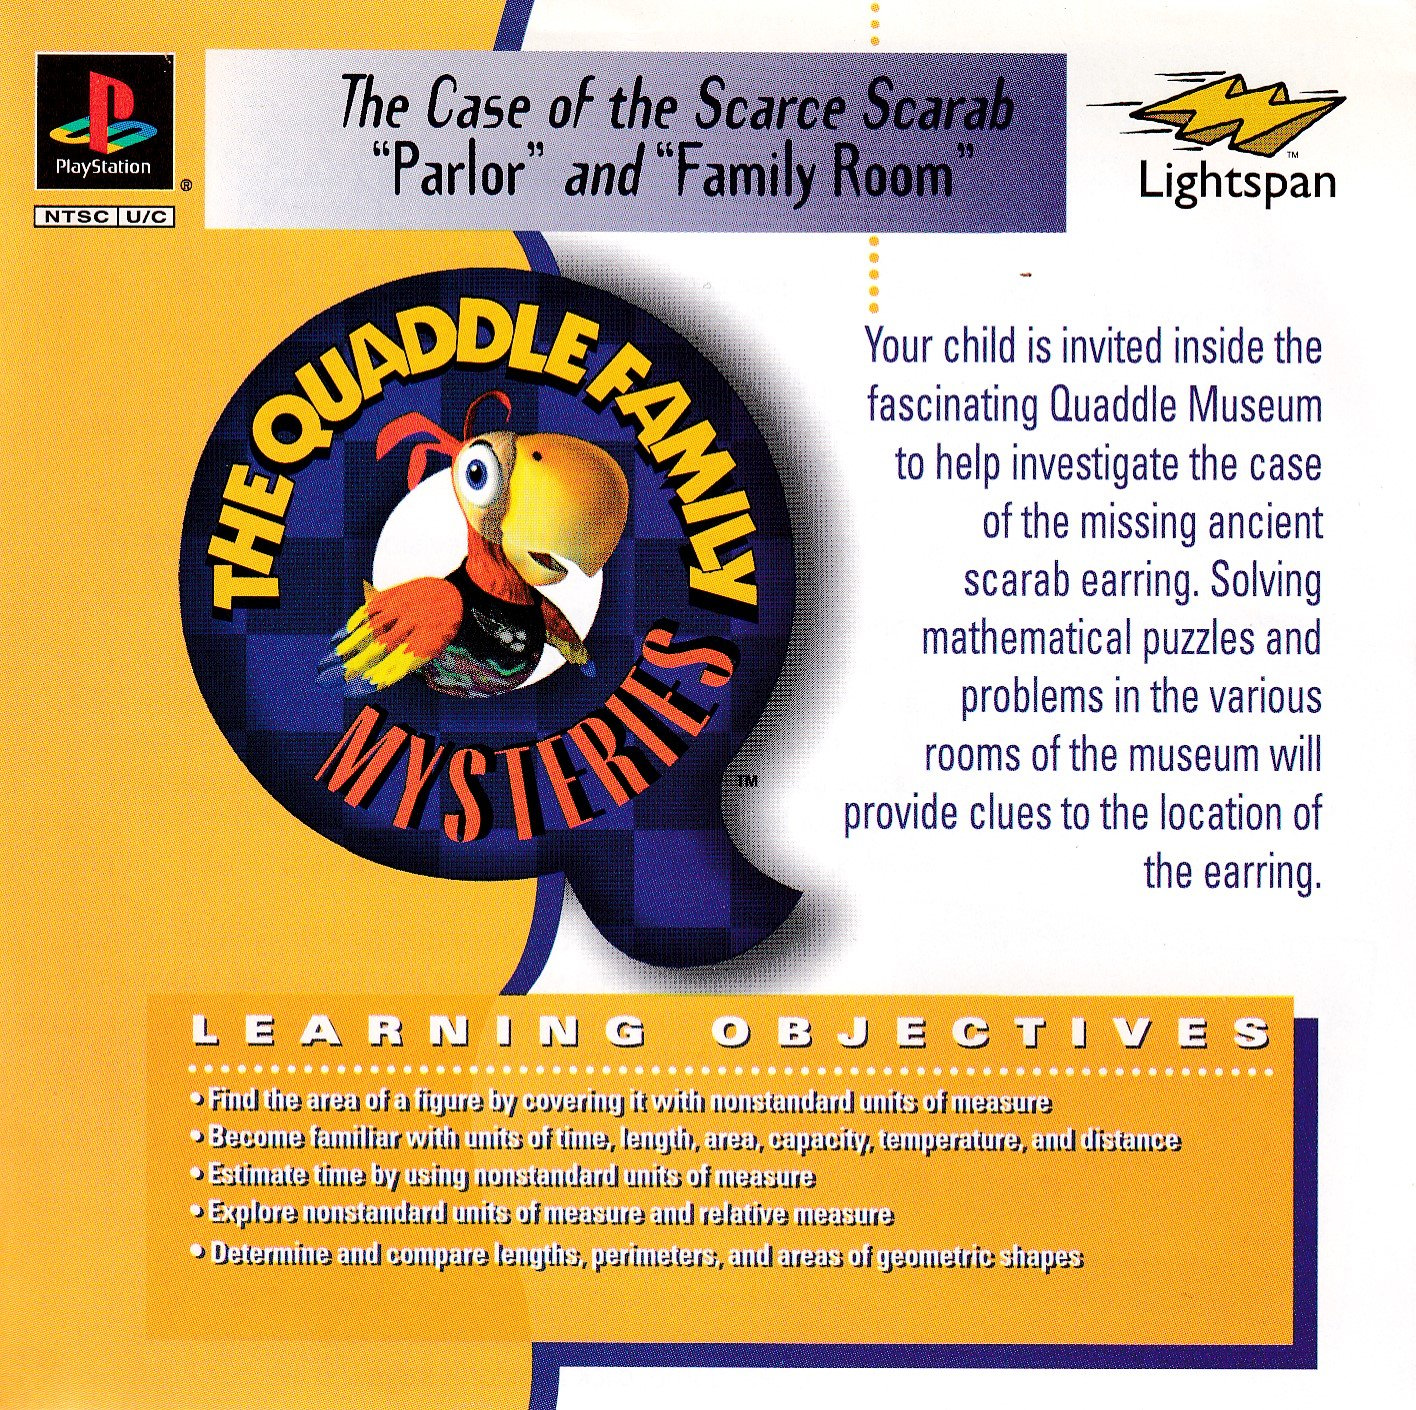 Quaddle Family Mysteries 3: The Case of the Scarce Scarab: Parlor: Family Room